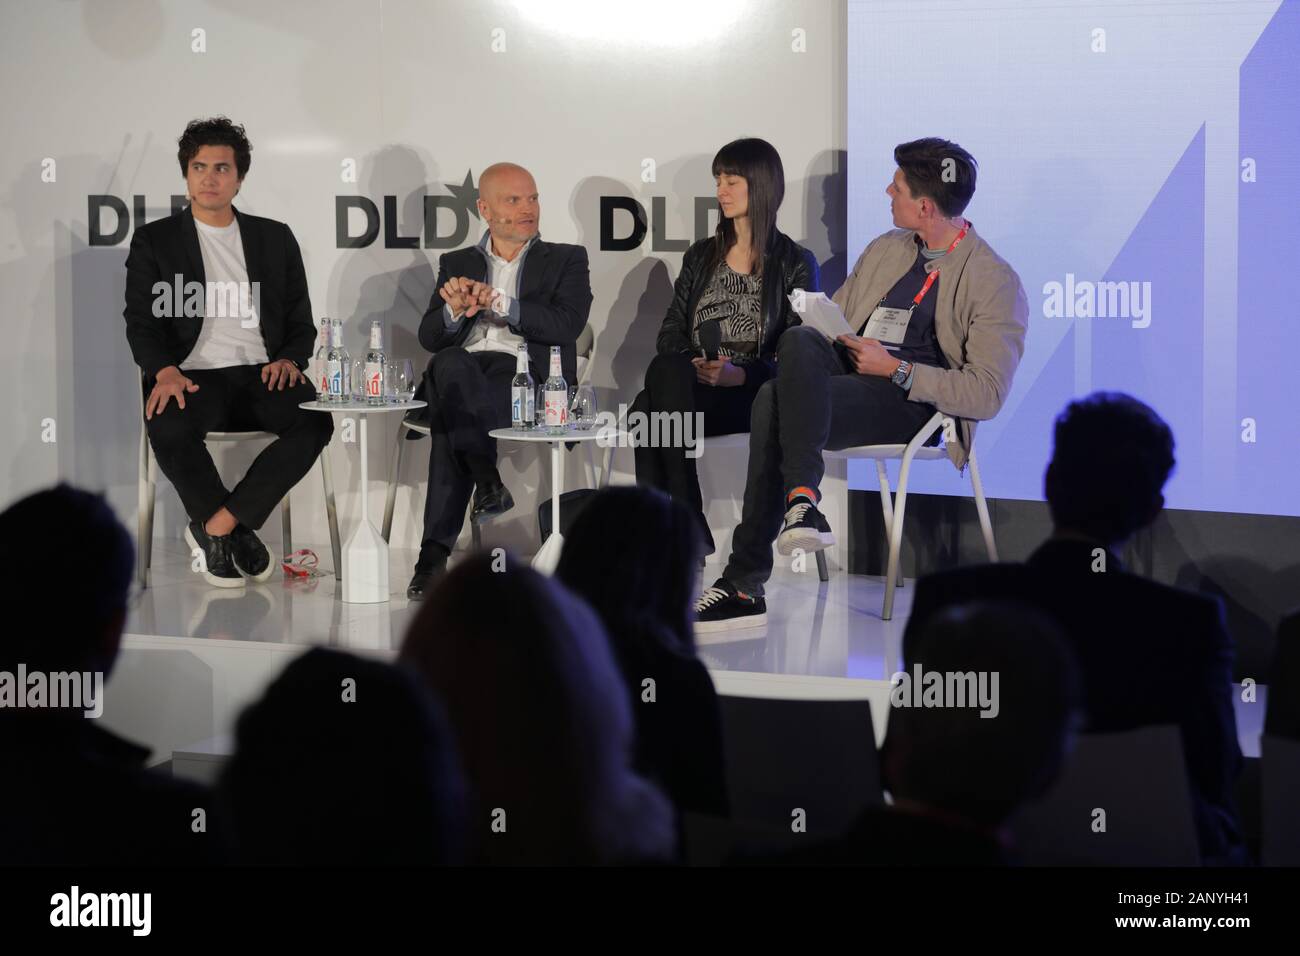 Munich, Bavaria. 19th Jan, 2020. (l-r) Chase Lochmiller (Co-founder & CEO Crusoe Energy Systems), John Pfeffer (Founder Pfeffer Capital LP), Elizabeth Stark (CEO and Co-Founder of Lightning Labs) and Alexander Liegl (Co-Founder and CEO Layer1) discuss during a panel at DLD Munich Conference 2020, Europe's big innovation conference, Alte Kongresshalle, Munich, January 18-20, 2020 Picture Alliance for DLD/Hubert Burda Media | usage worldwide Credit: dpa/Alamy Live News Stock Photo